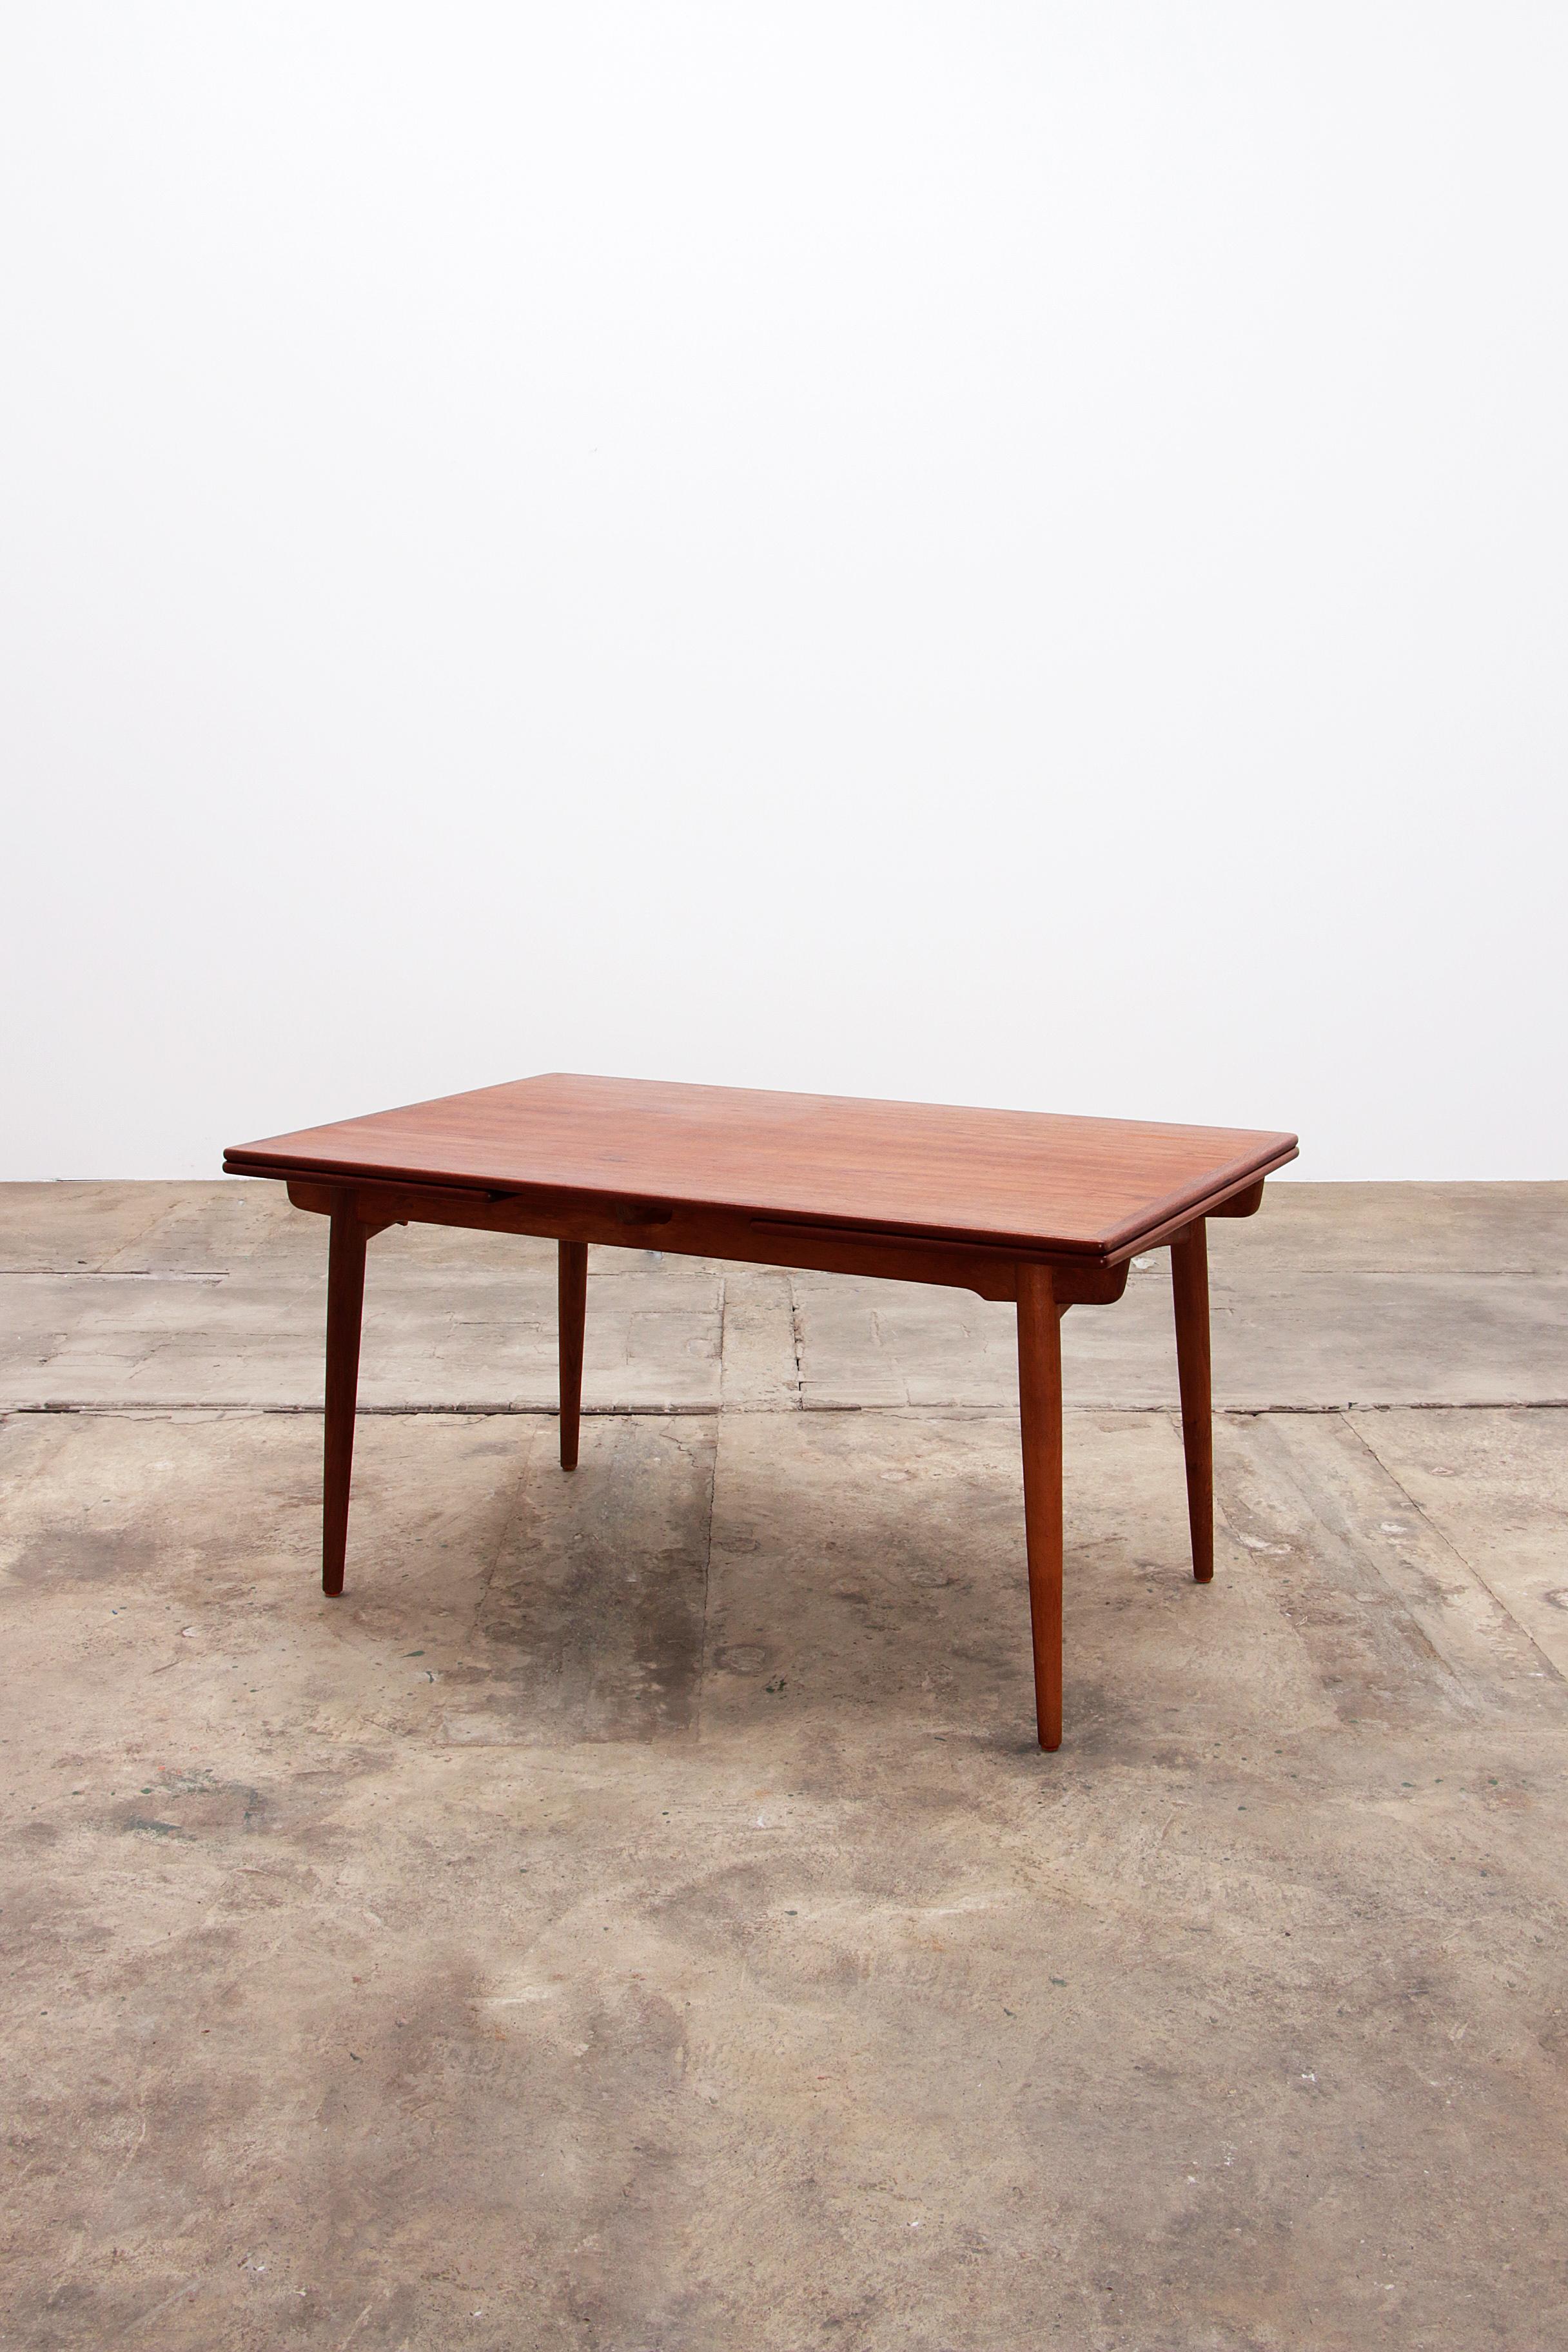 Hans J. Wegner Dining table from Andreas Tuck 
Extending dining table designed by Hans J. Wegner for Andreas Tuck in Denmark circa 1950. 
This iconic AT-312 model features a solid teak rectangular top and slanted tapered legs for a minimalist and